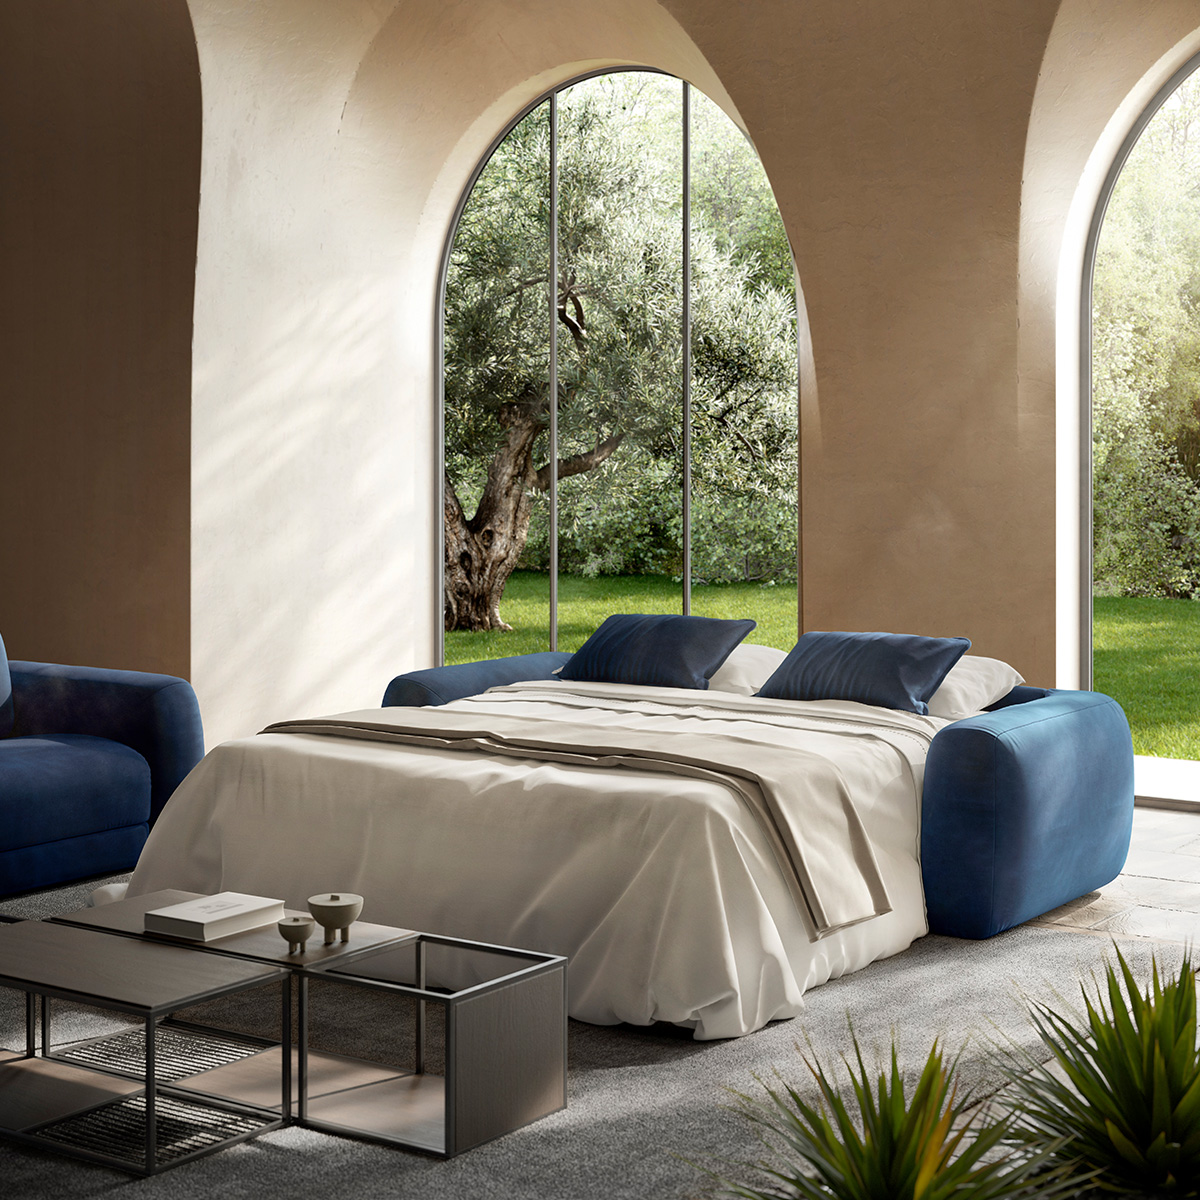 Natuzzi editorial - “Ready-to-bed" mechanism